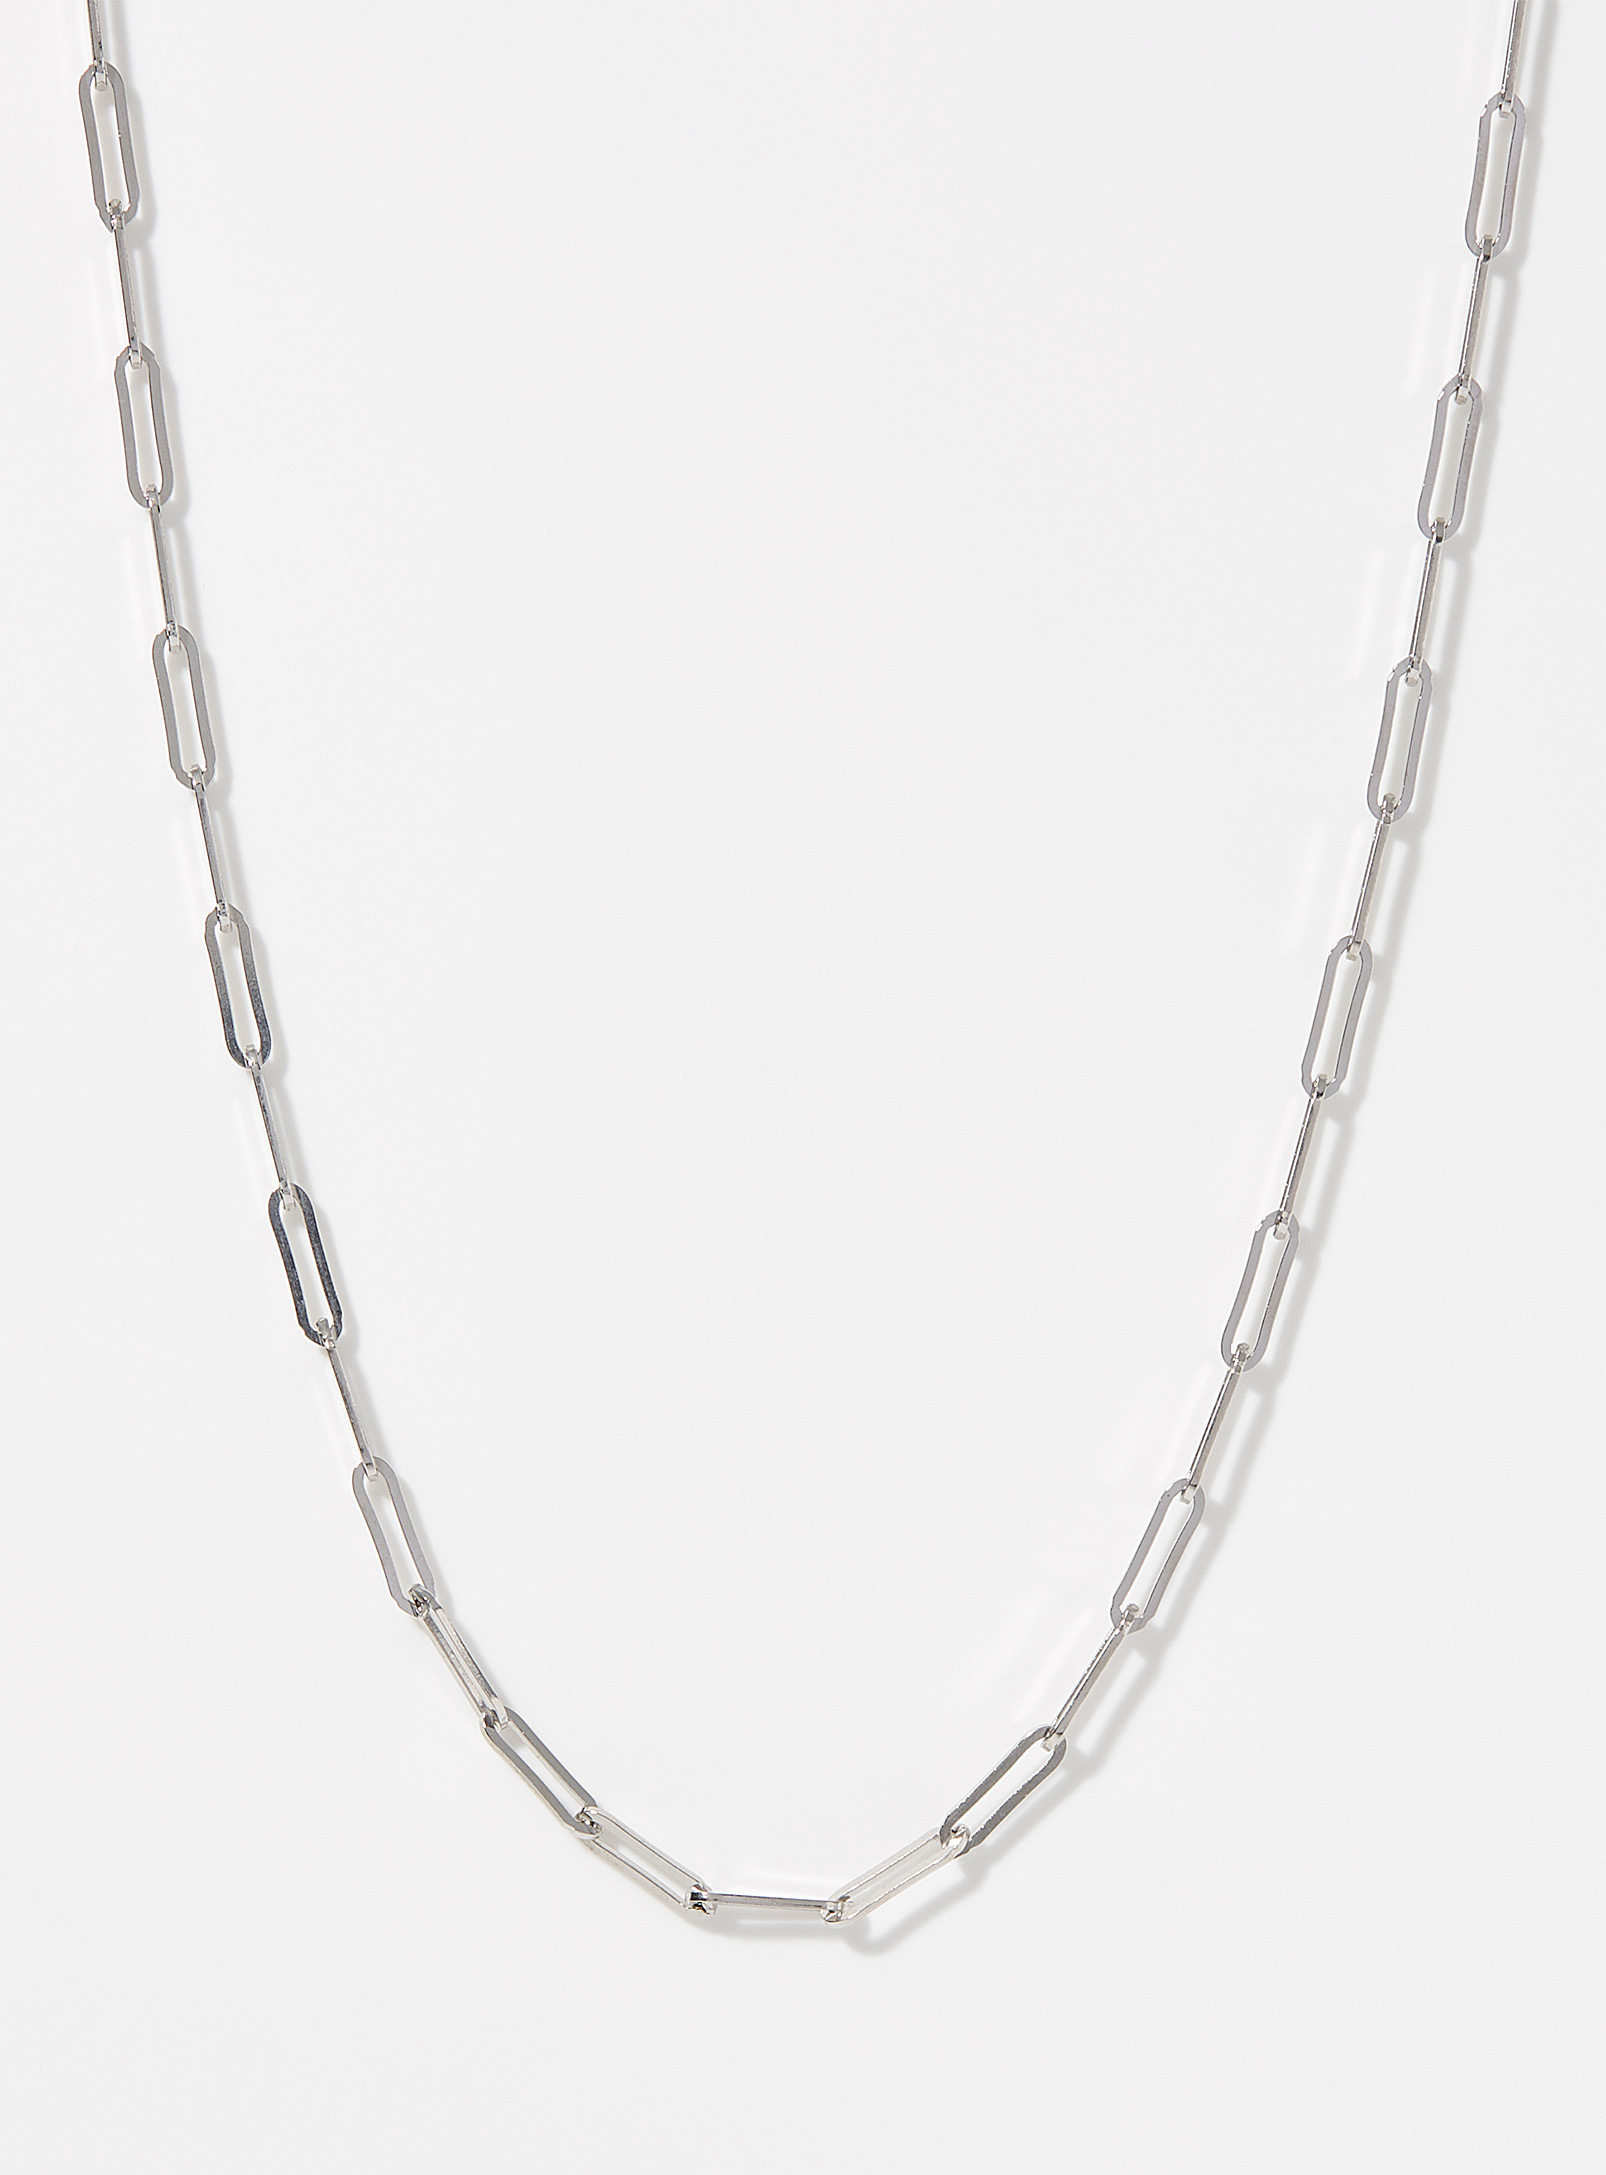 Simons - Women's Paperclip link silver chain